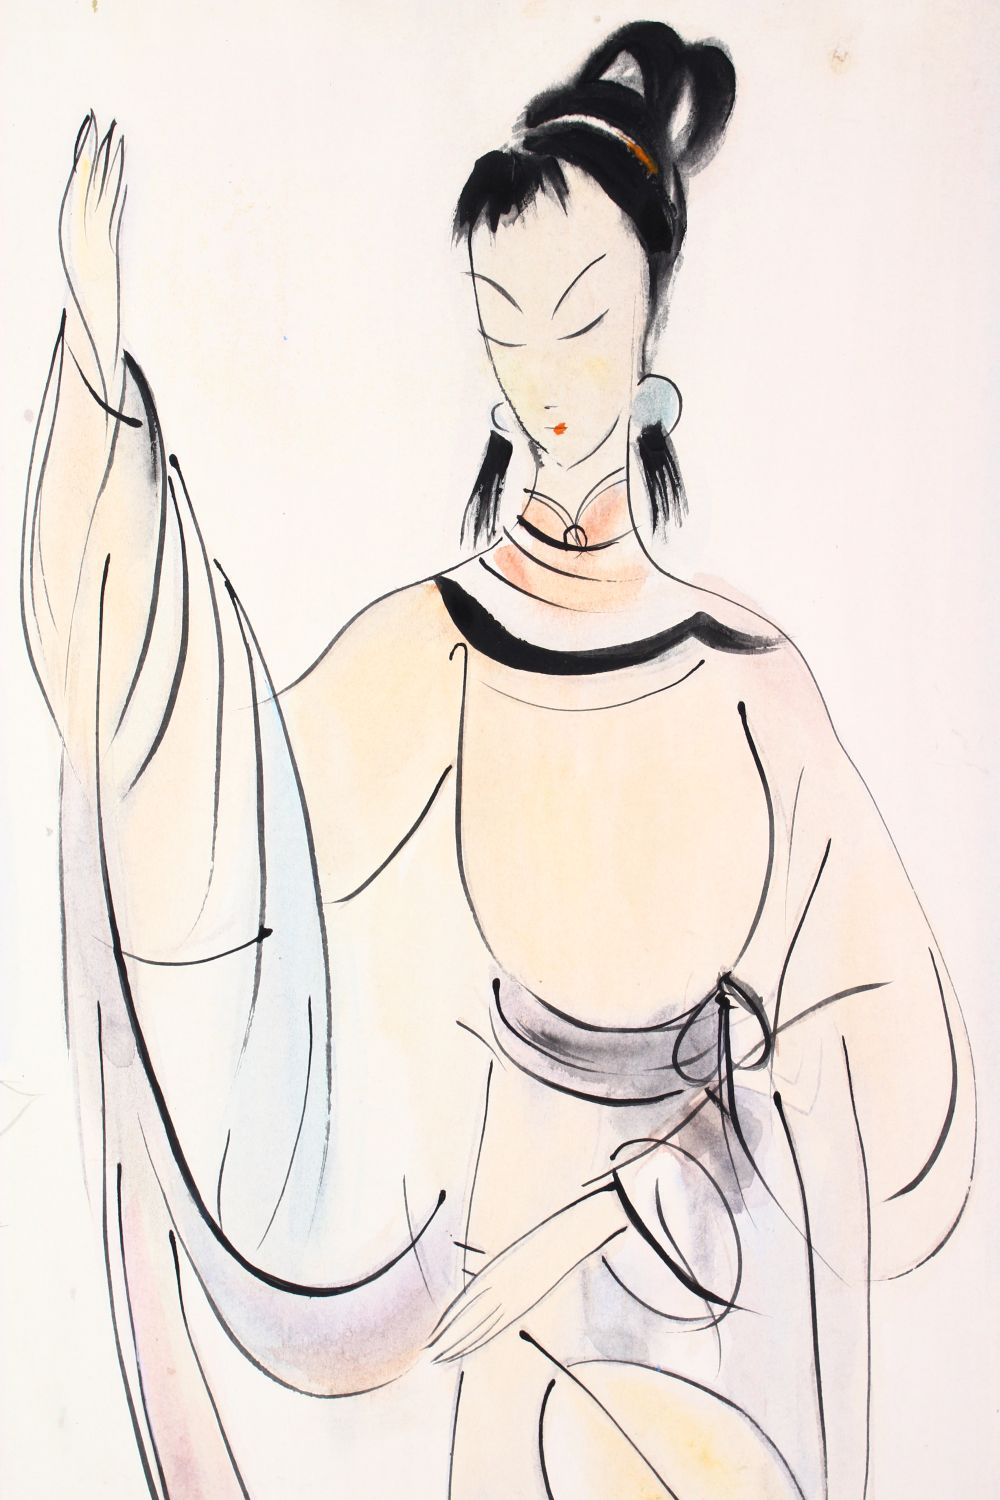 A GOOD 20TH CENTURY CHINESE PAINTING OF GUANYIN - LIN FENGMIAN, the painting painted upon paper or - Image 2 of 4